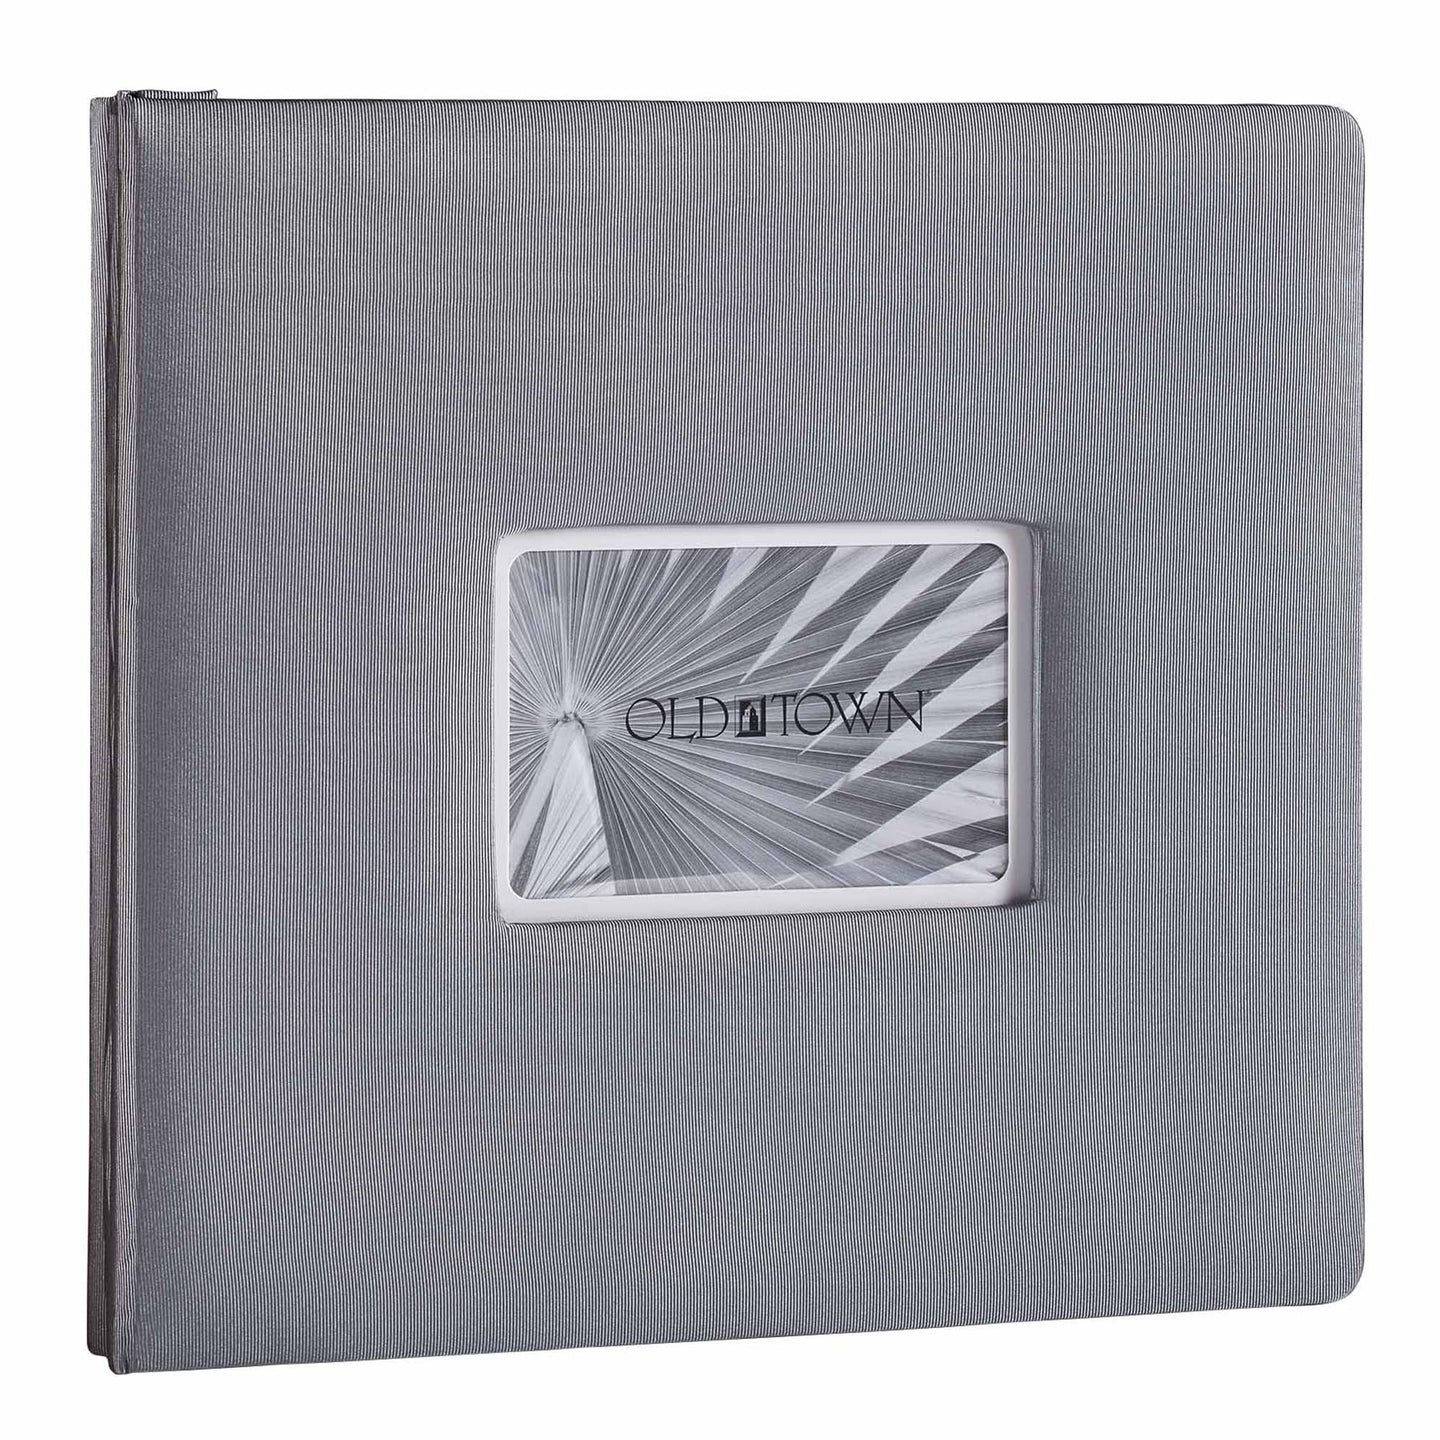 Single grey fabric scrapbook with 4x6 inch window for displaying a photo or other item.